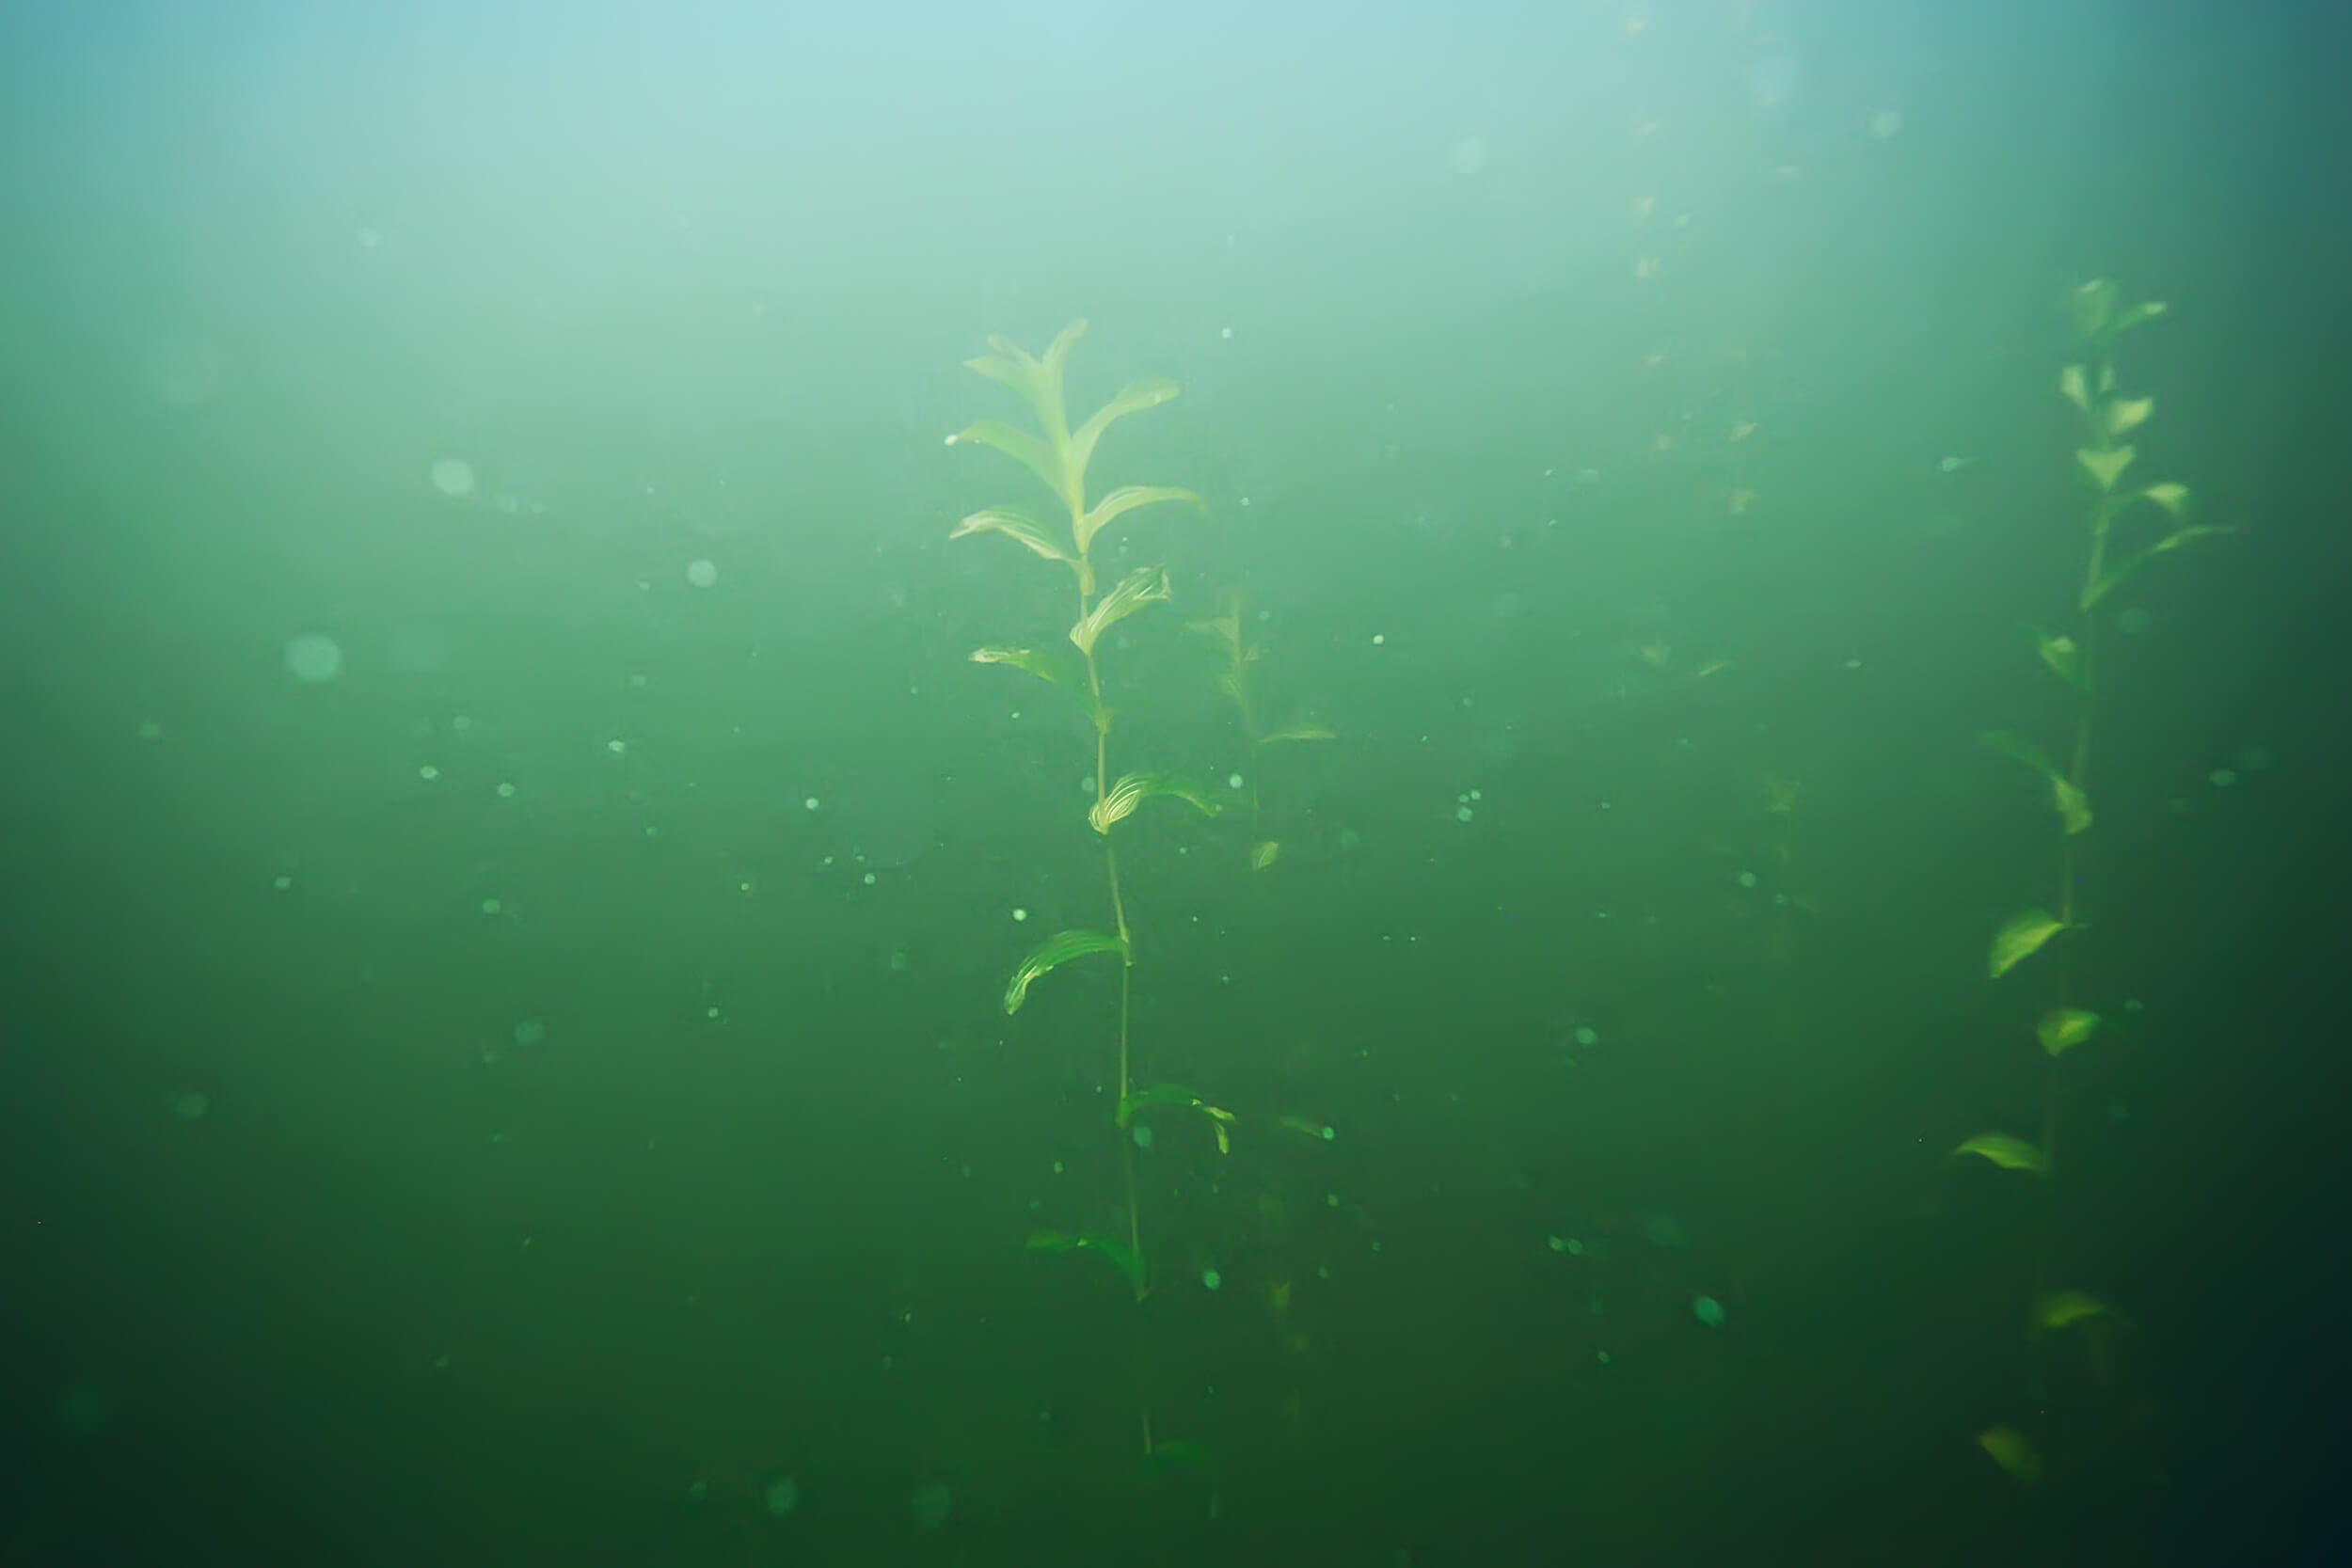 Aquatic plants are just about visible through murky green water.